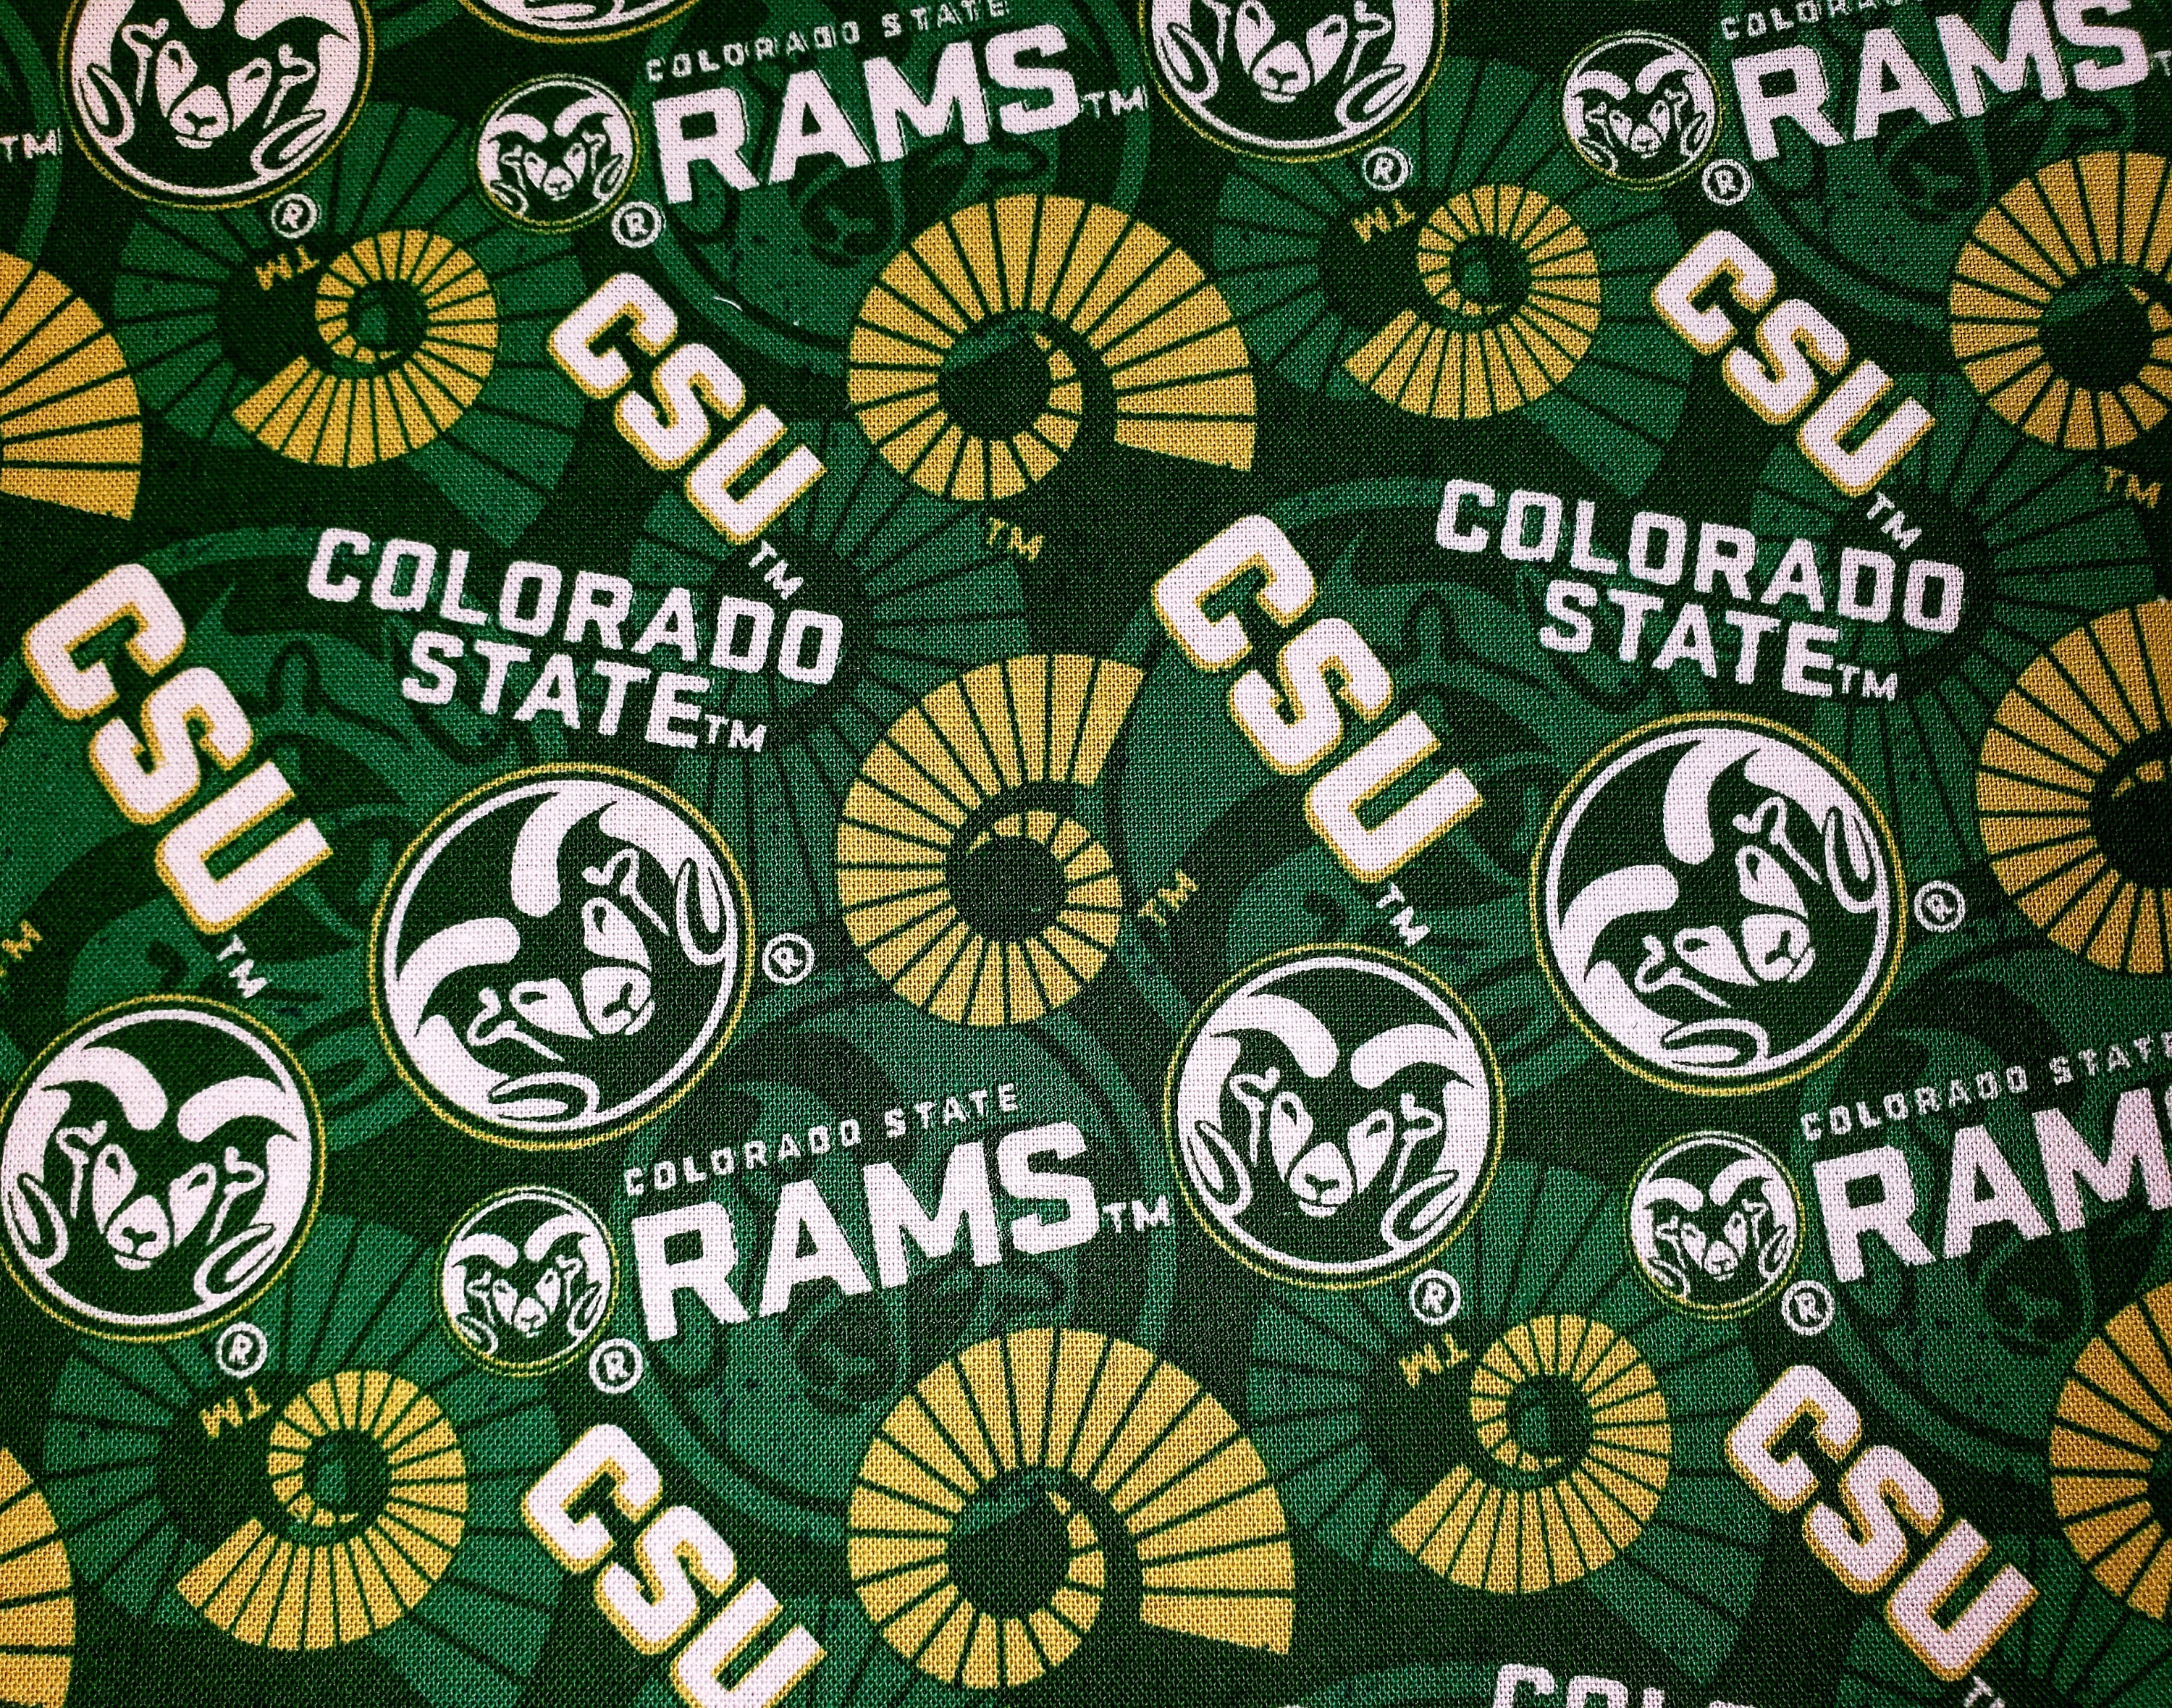 Colorado State University Csu Rams Washable Reusable Face Mask, Graduation, Reunion, Tailgate, With Comfort Clip & Free Shipping